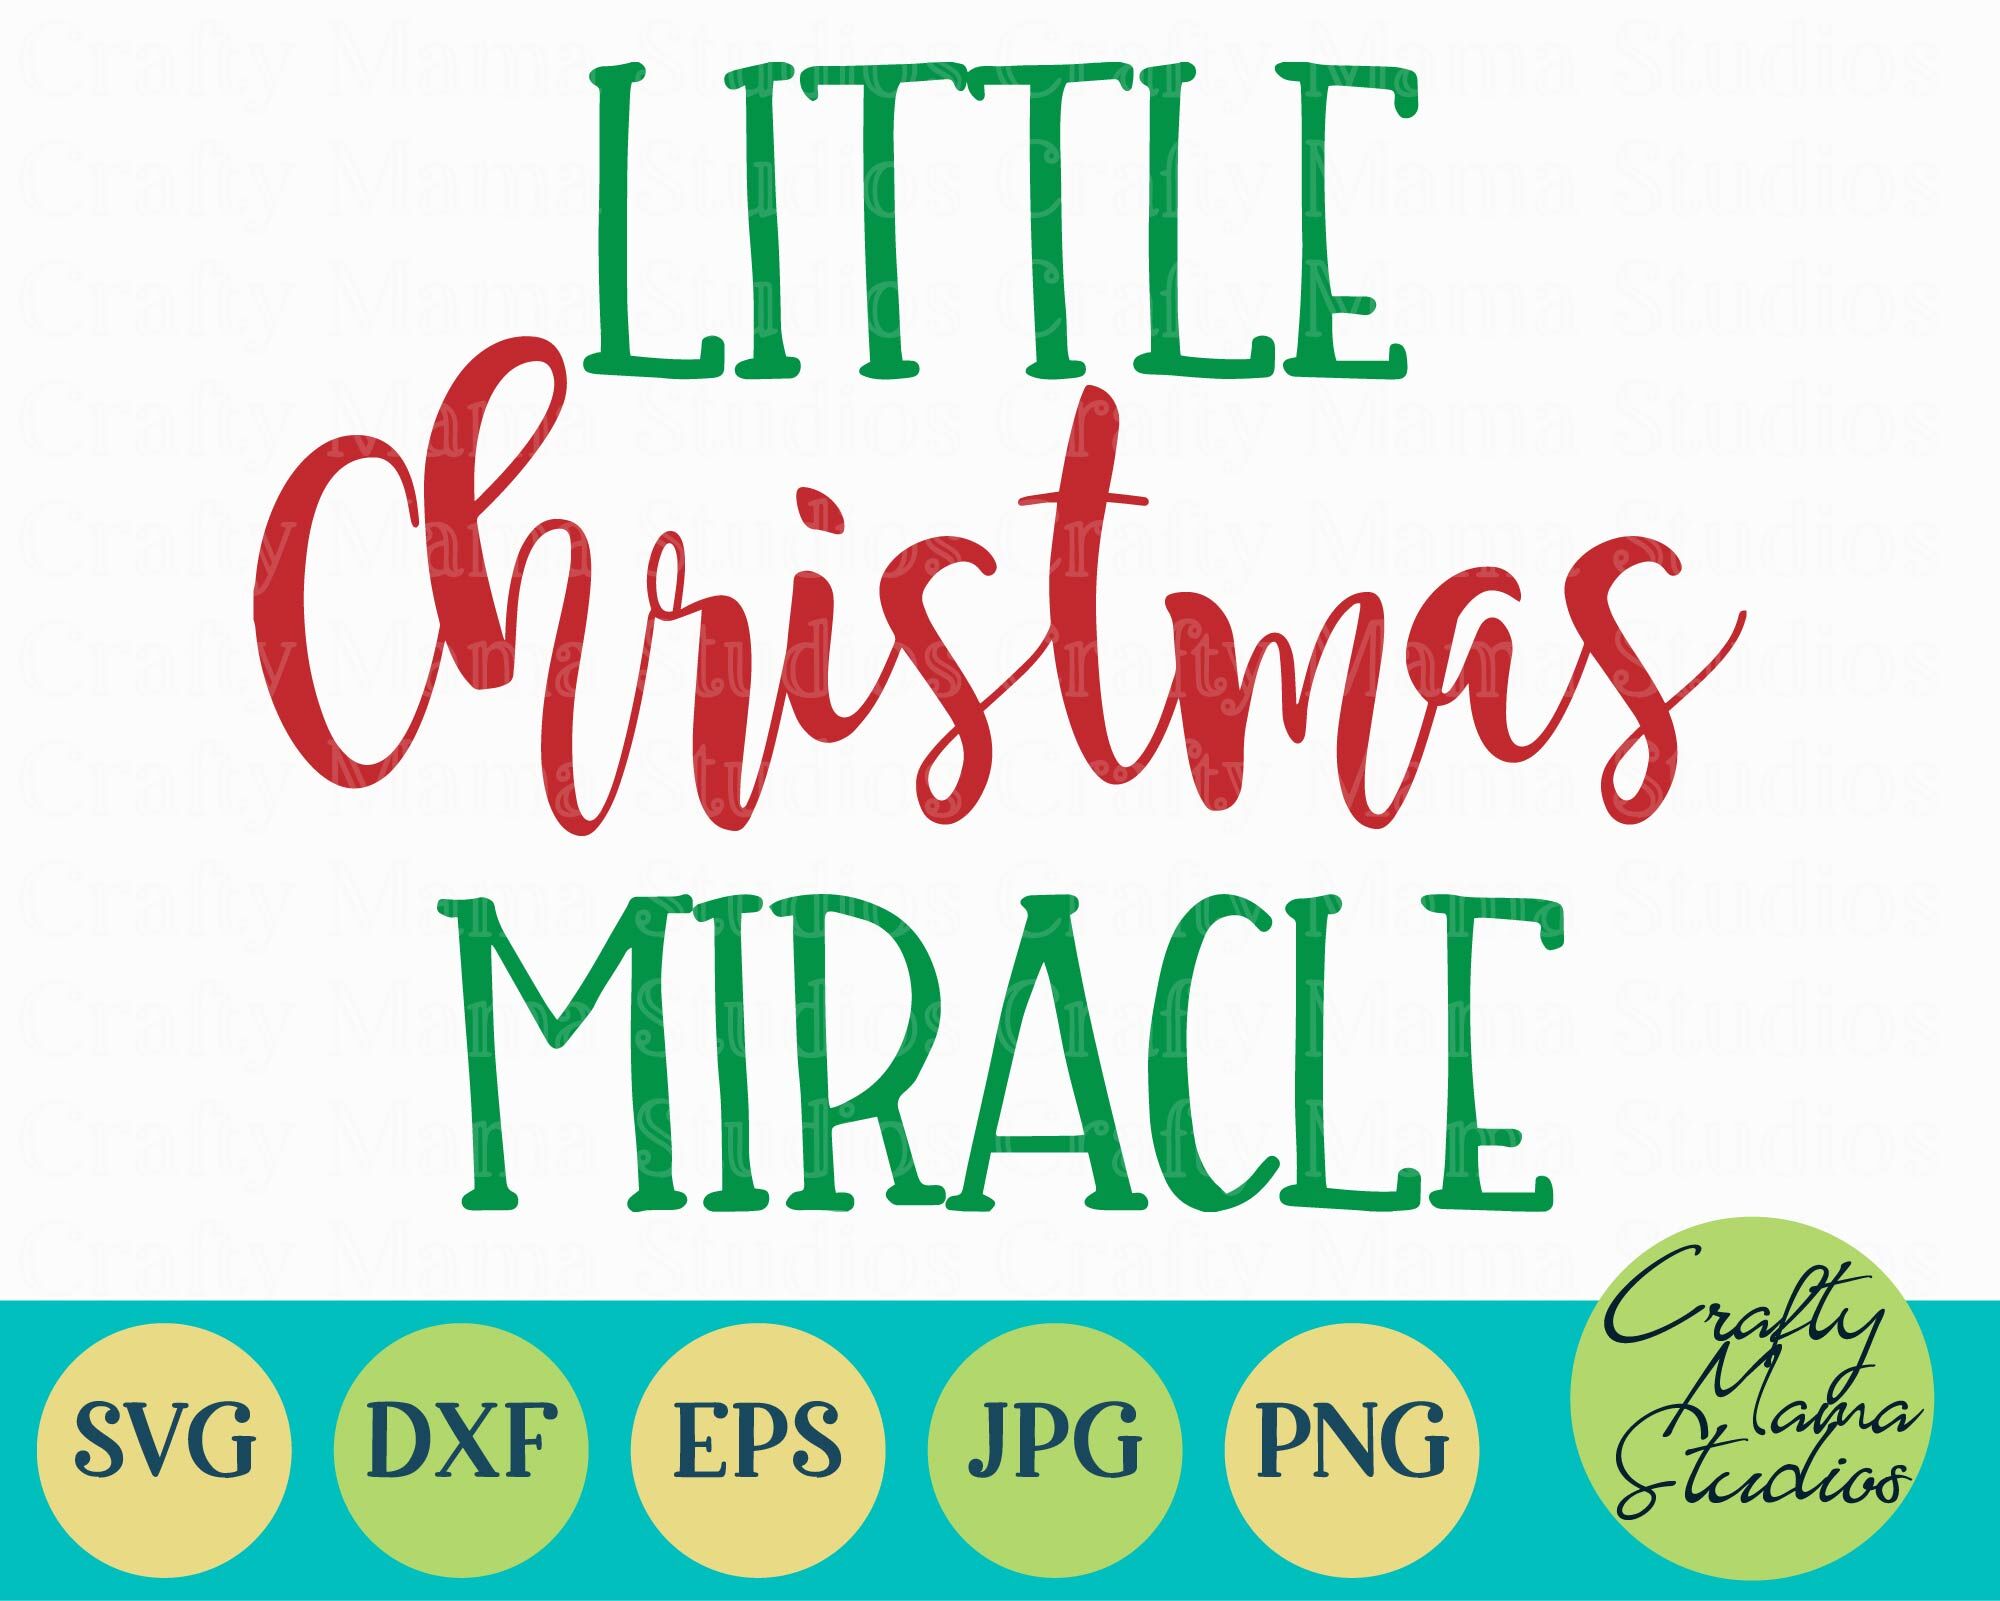 Christmas Holiday Svg My First Christmas Little Christmas Miracl By Crafty Mama Studios Thehungryjpeg Com